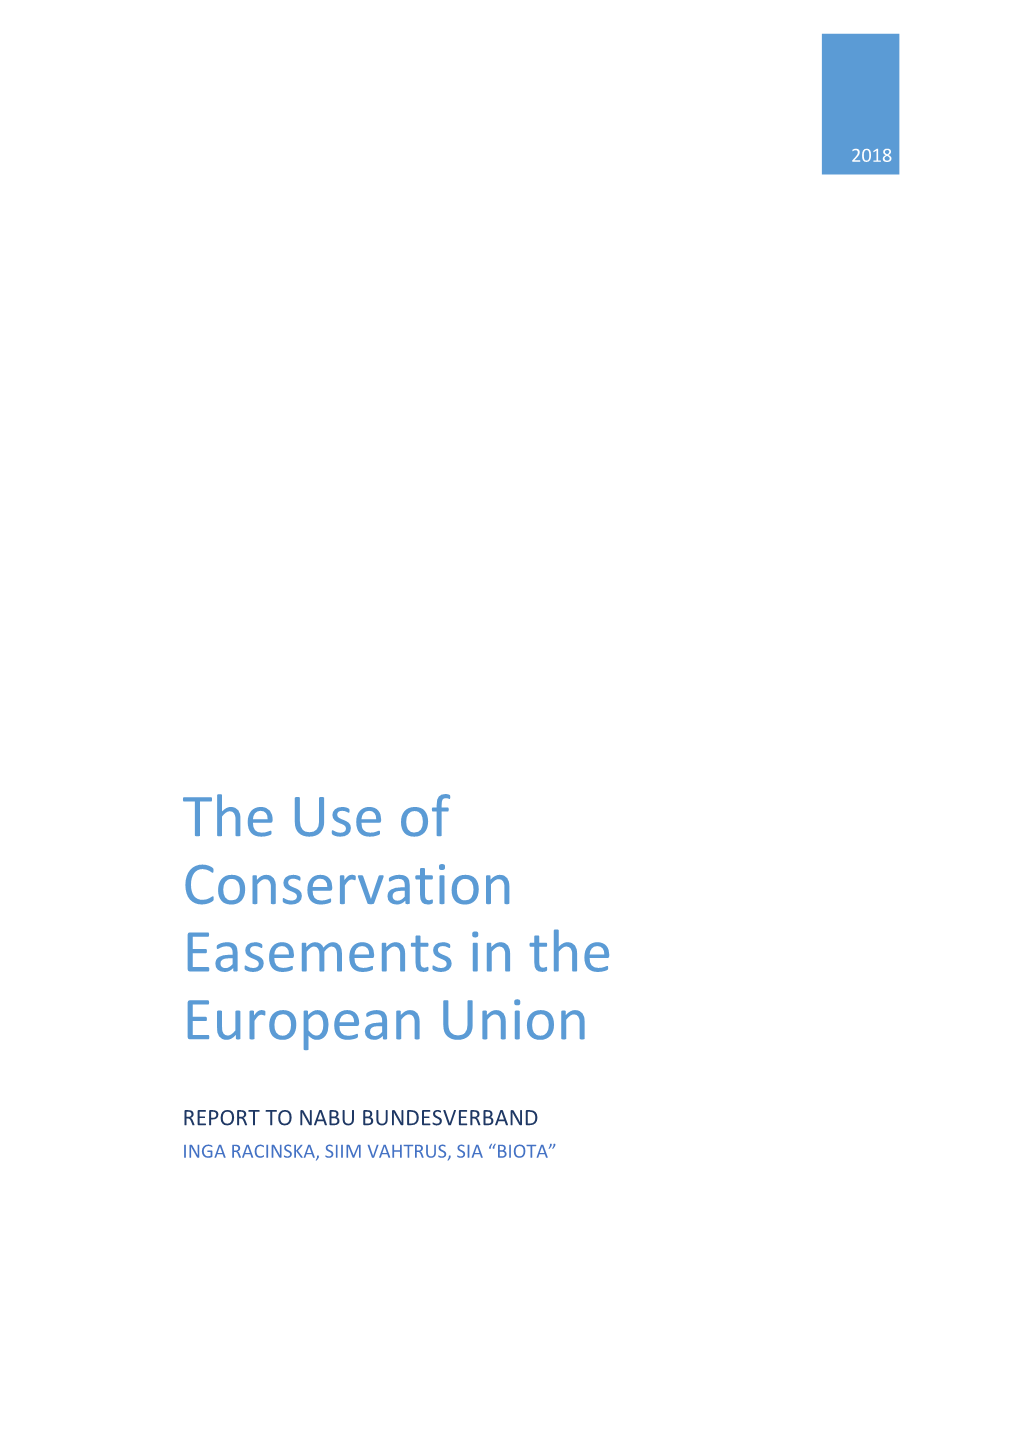 The Use of Conservation Easements in the European Union